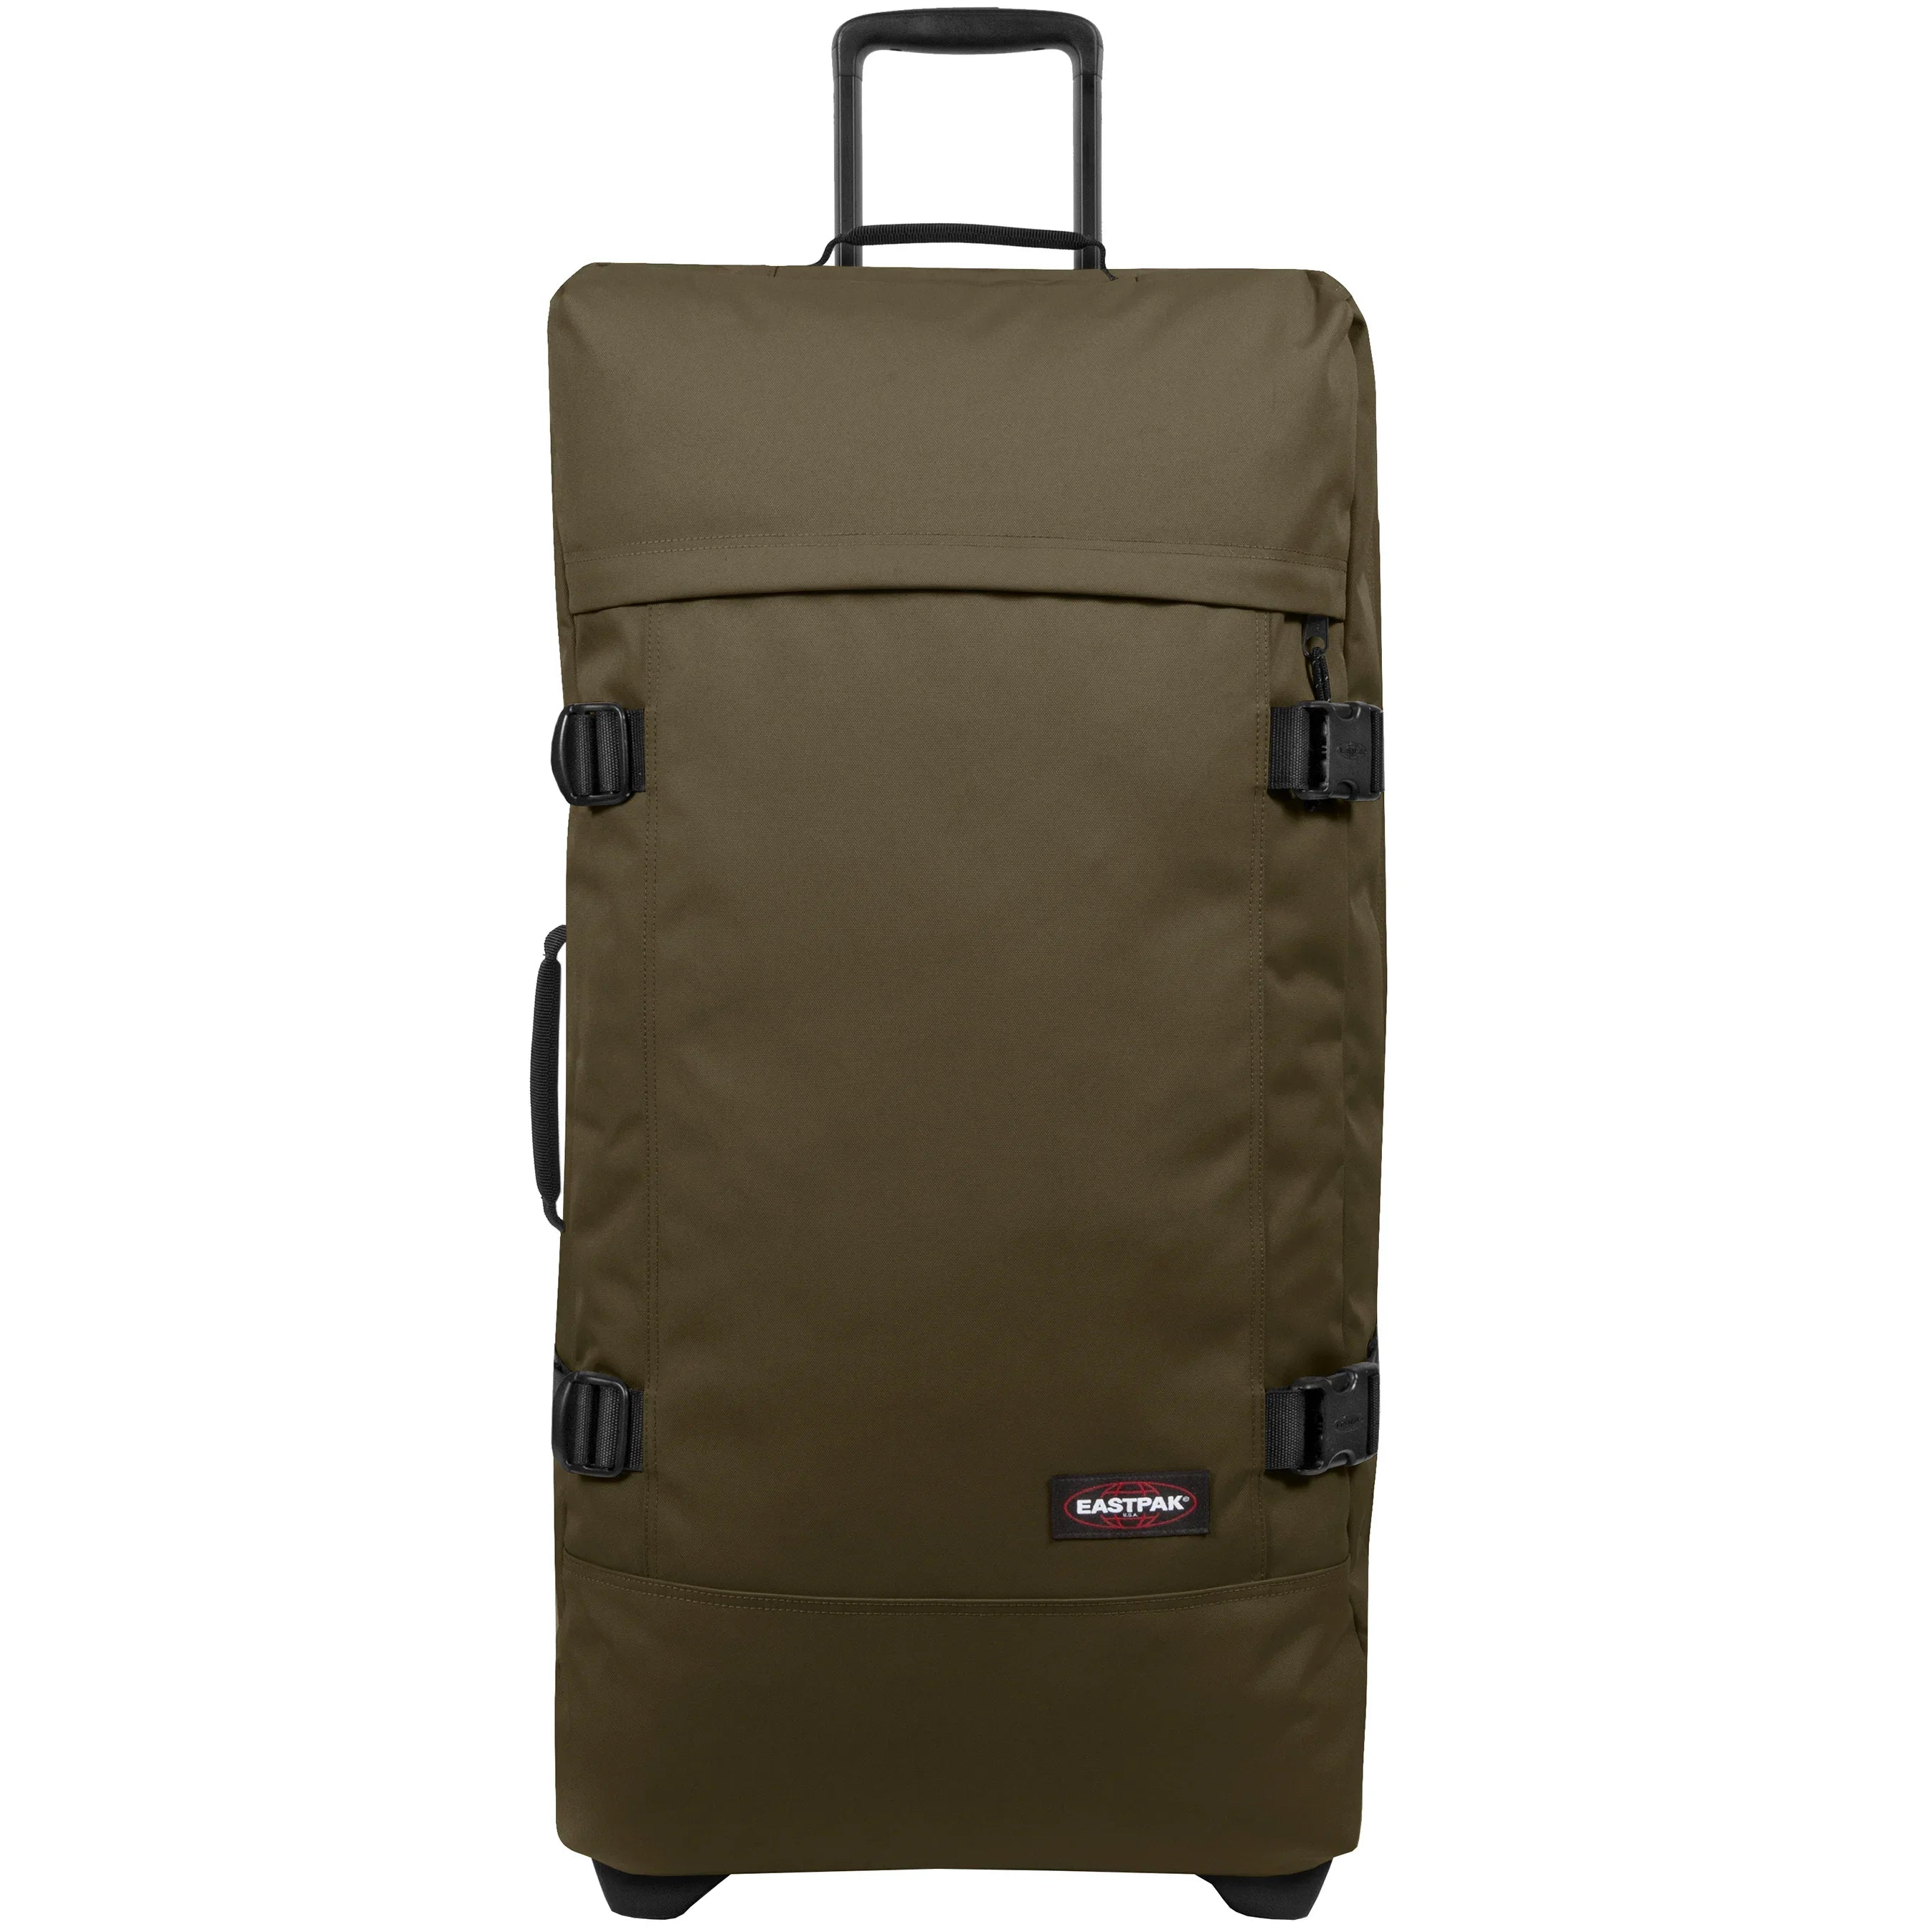 Eastpak Authentic Travel Tranverz trolley 2 roues 79 cm - Army Olive